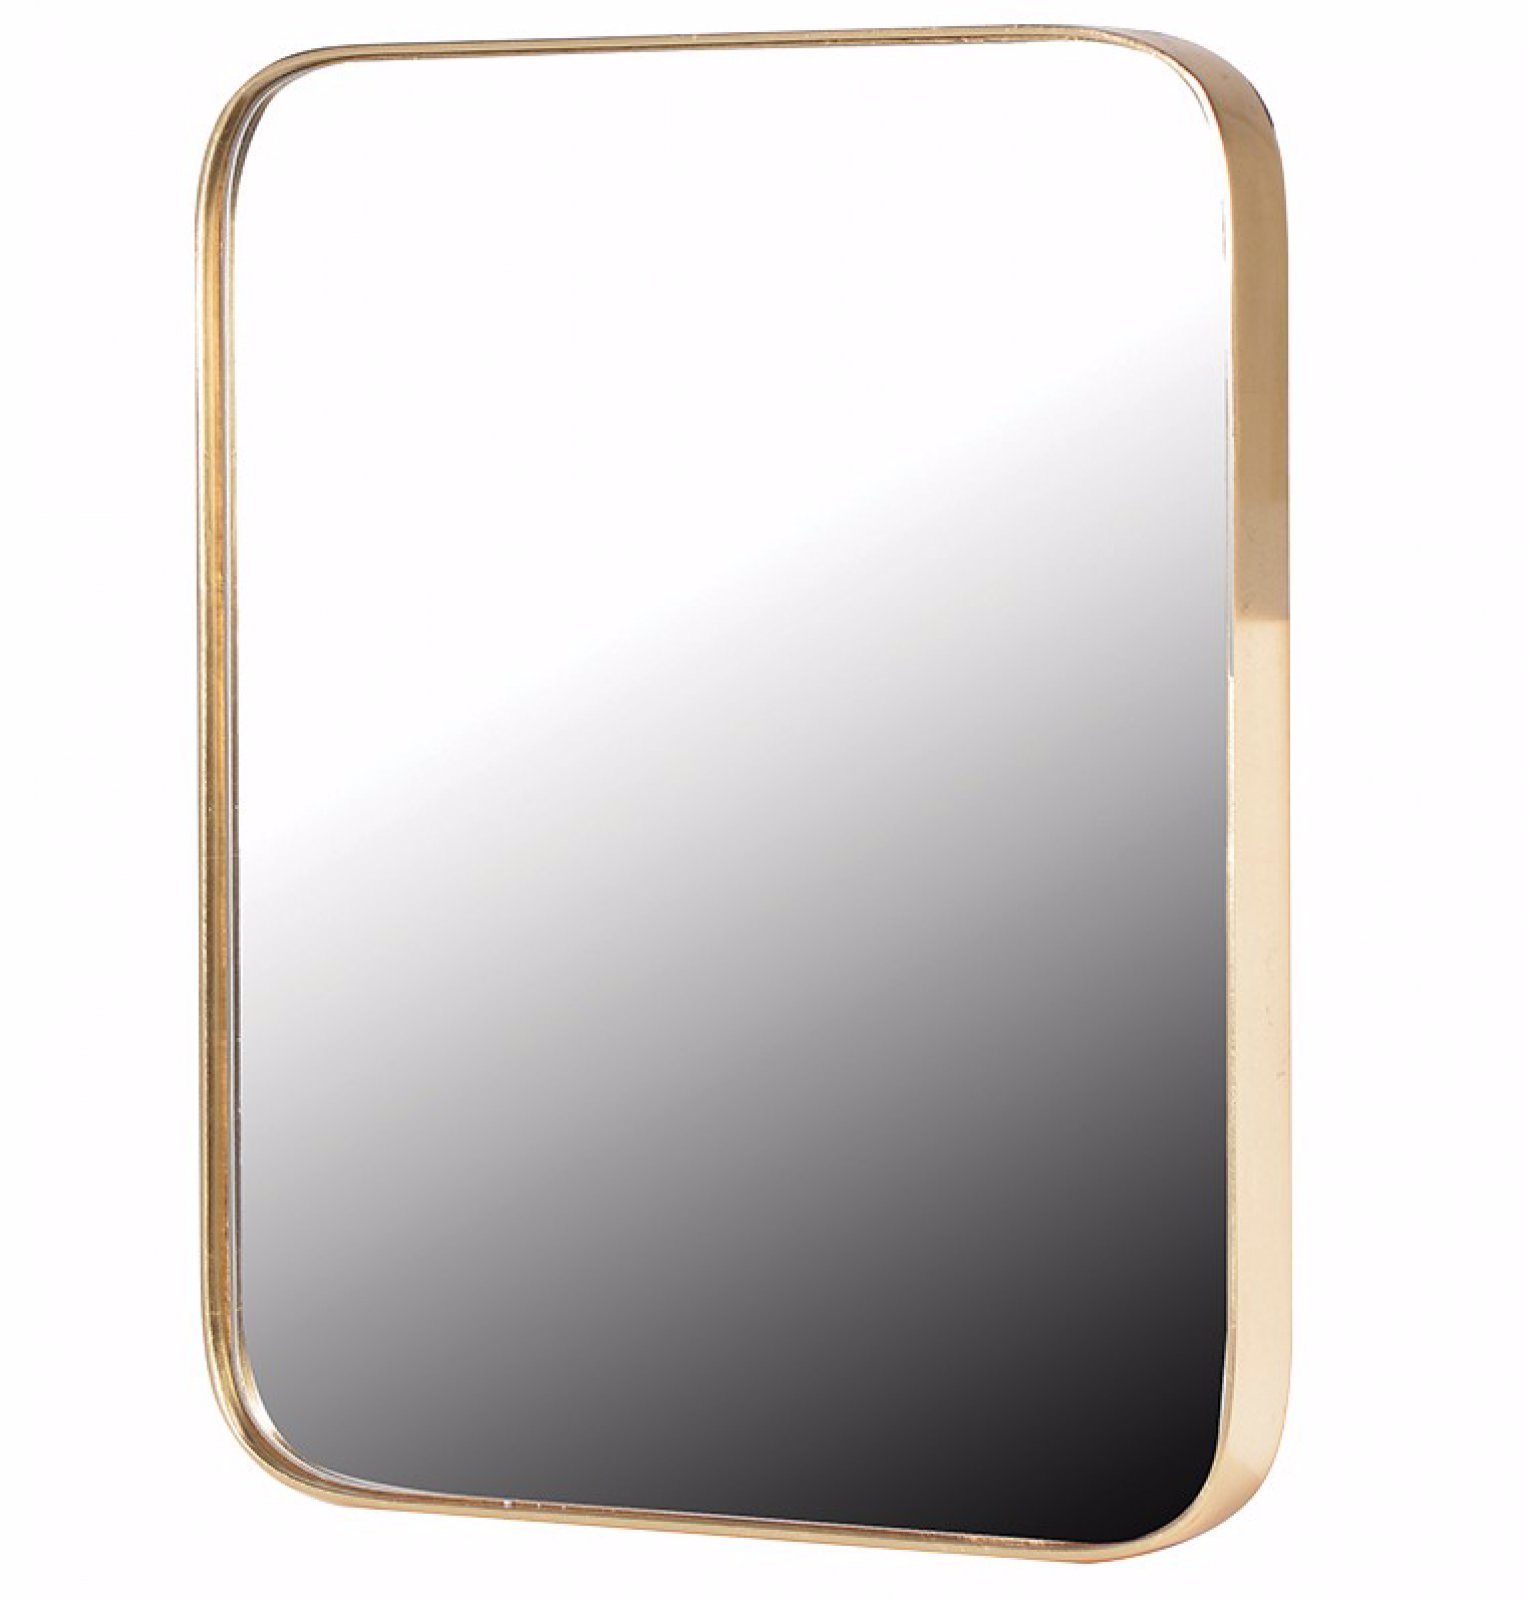 Gold Rectangular Mirror With Curved Frame